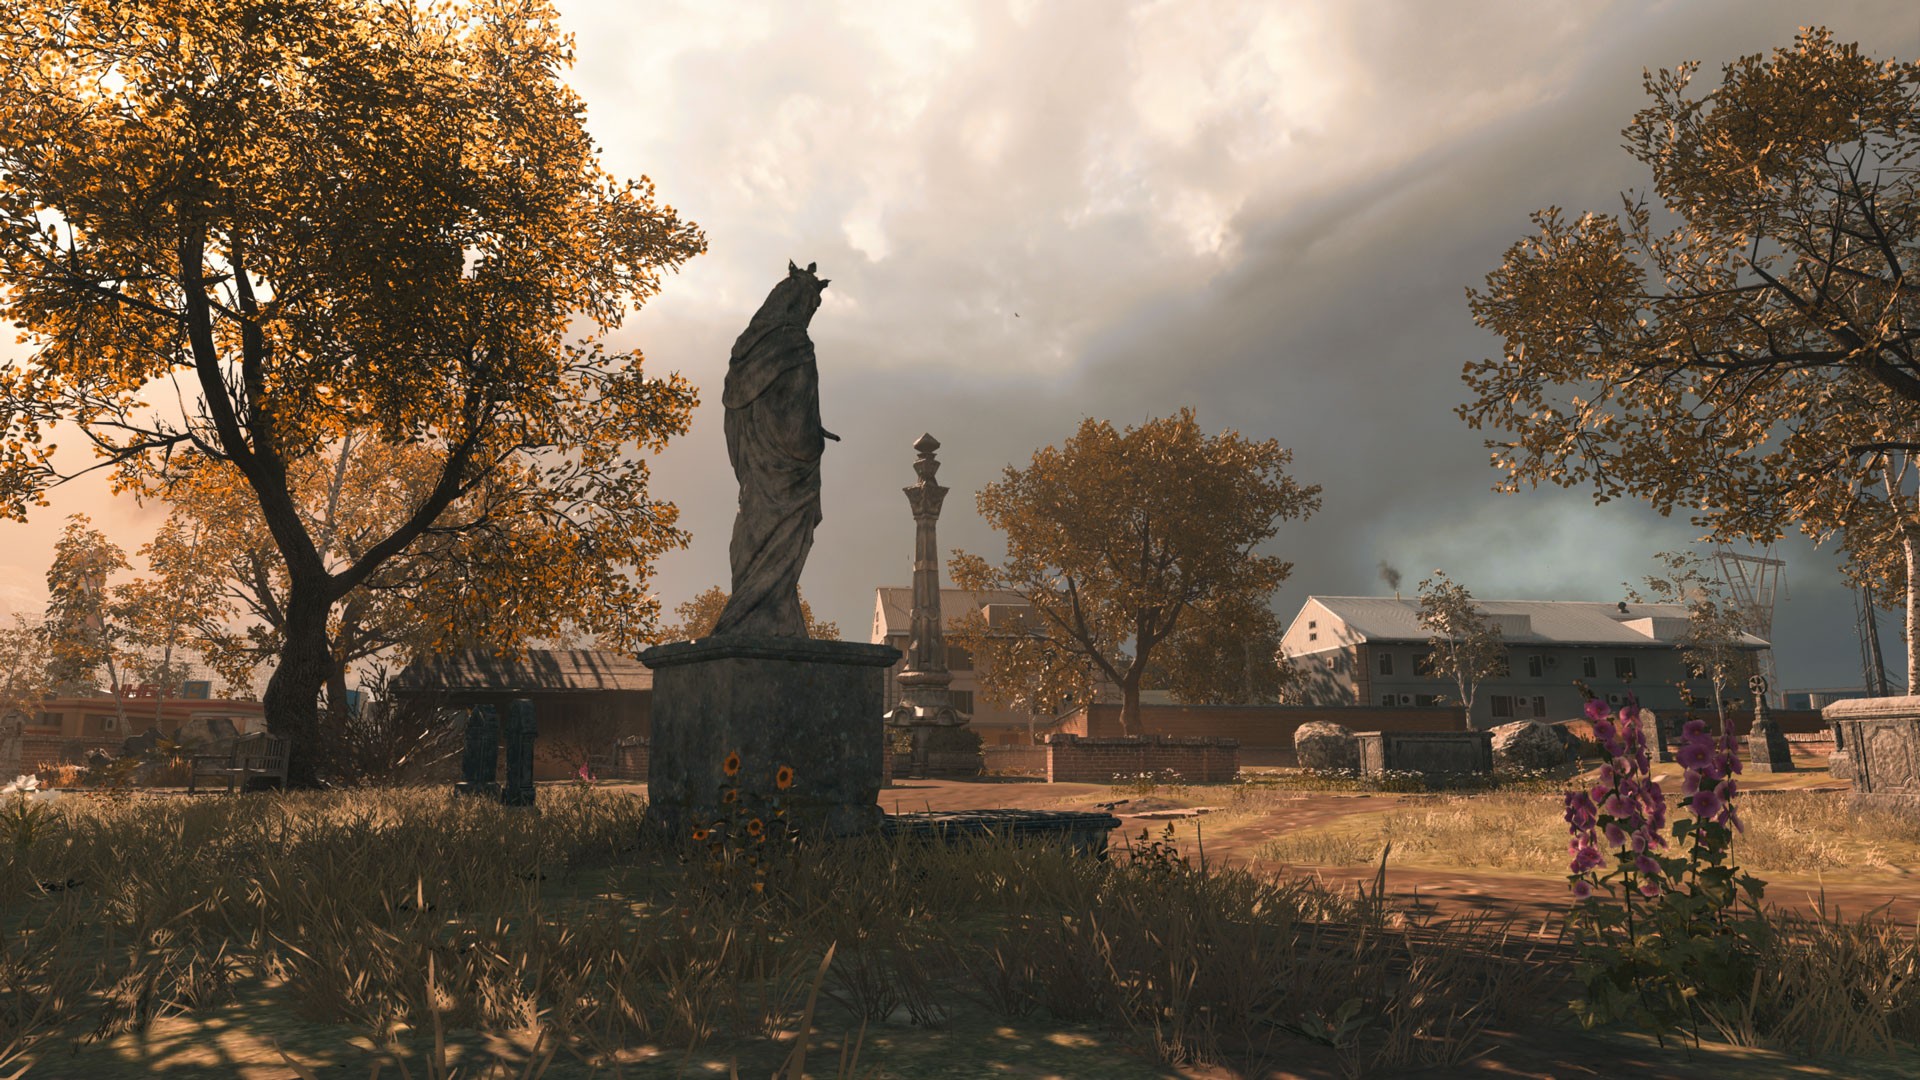 Warzone red door graveyard easter egg: A tombstone featuring the statue of a queen sitting in the VErdnask graveyard in Warzone.